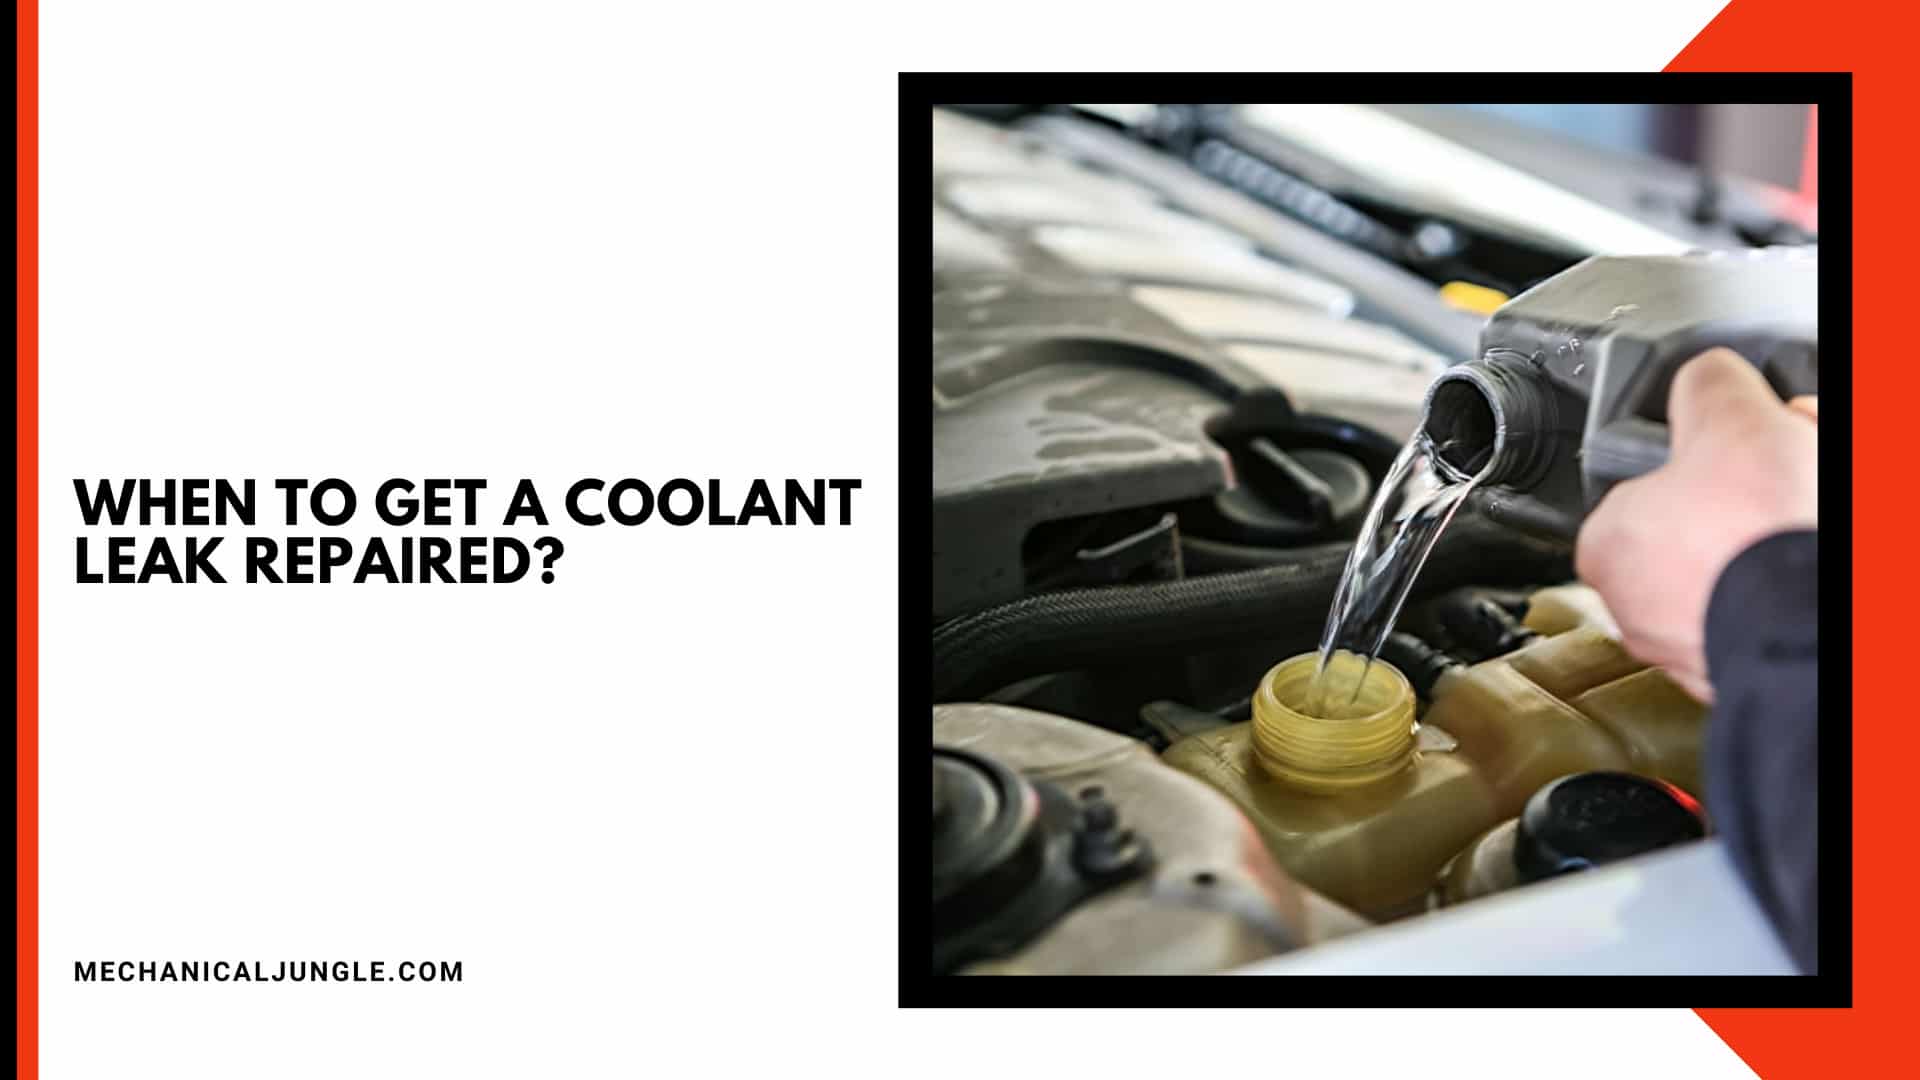 When to Get a Coolant Leak Repaired?